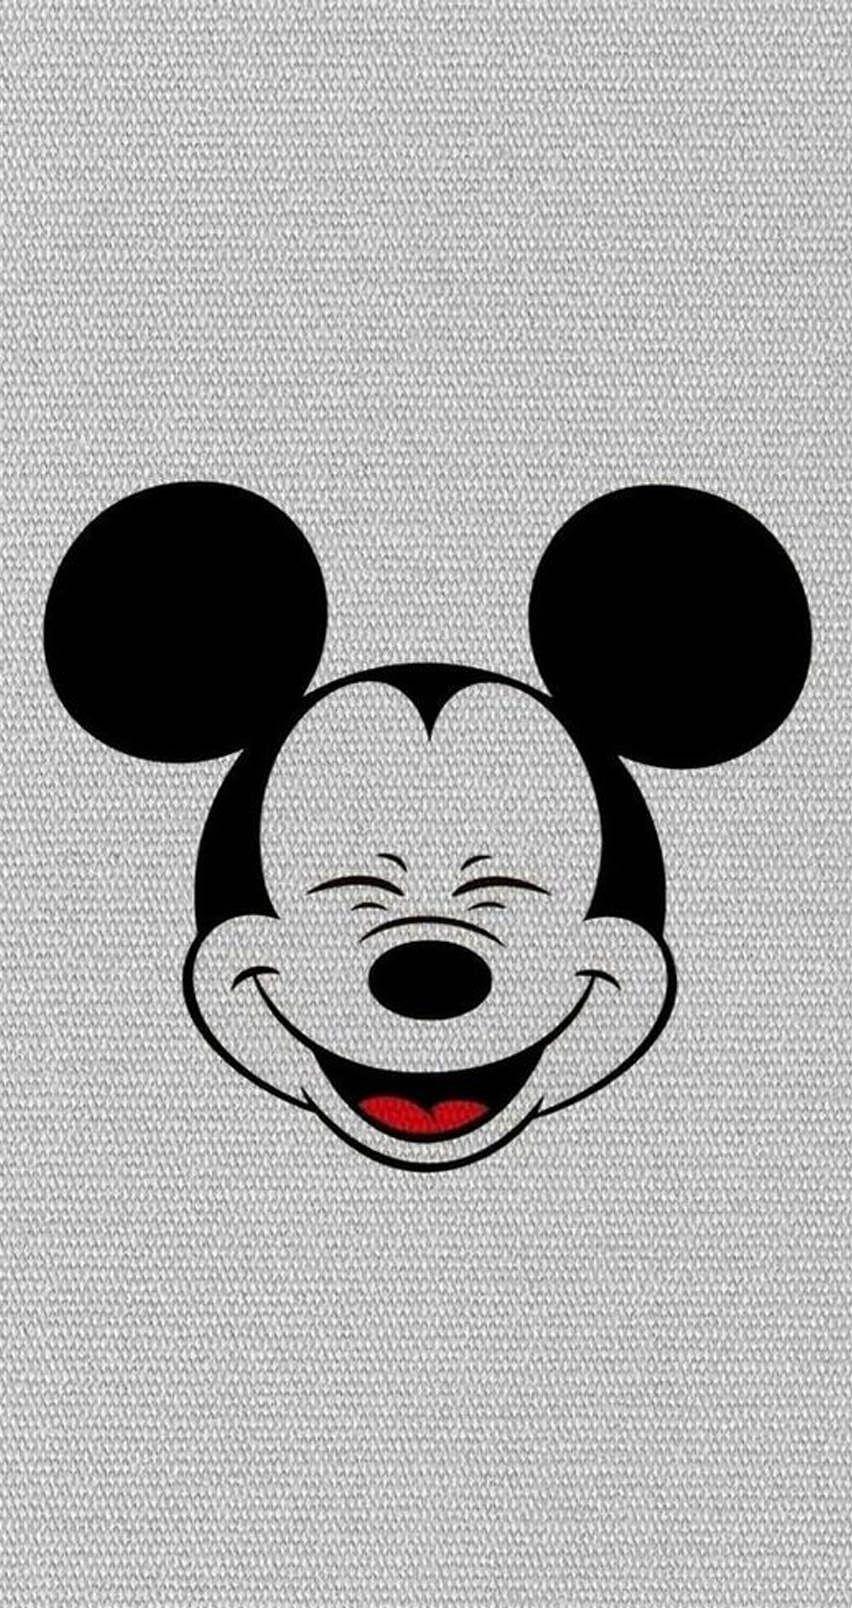 Mickey Mouse Wallpaper Black